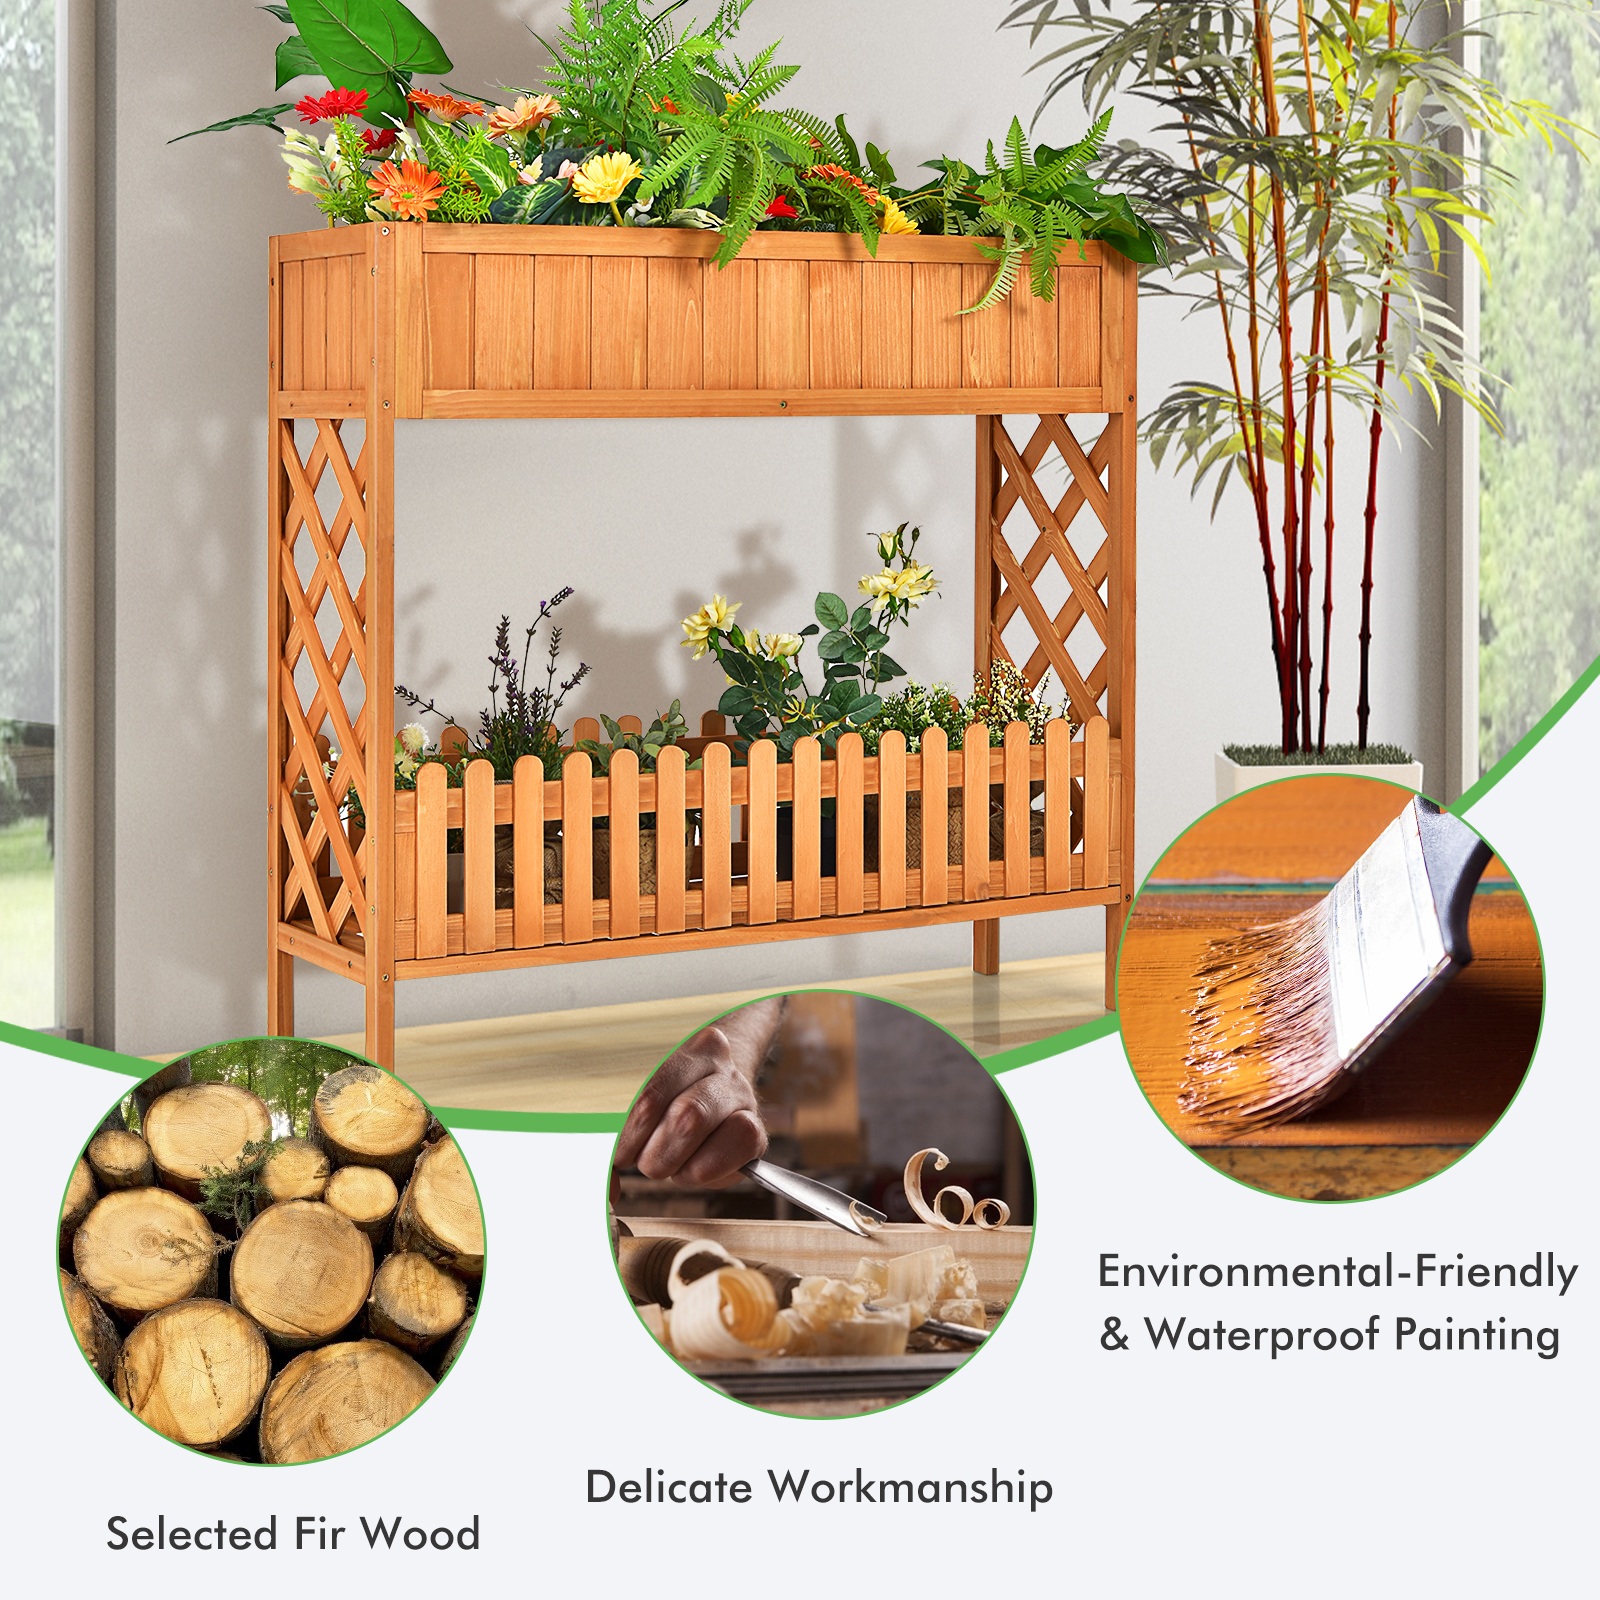 Topbuy Outdoor 2-Tier Wood Planter Raised Garden Bed Elevated Planter Box Kit w/Liner & Shelf for Backyard Patio